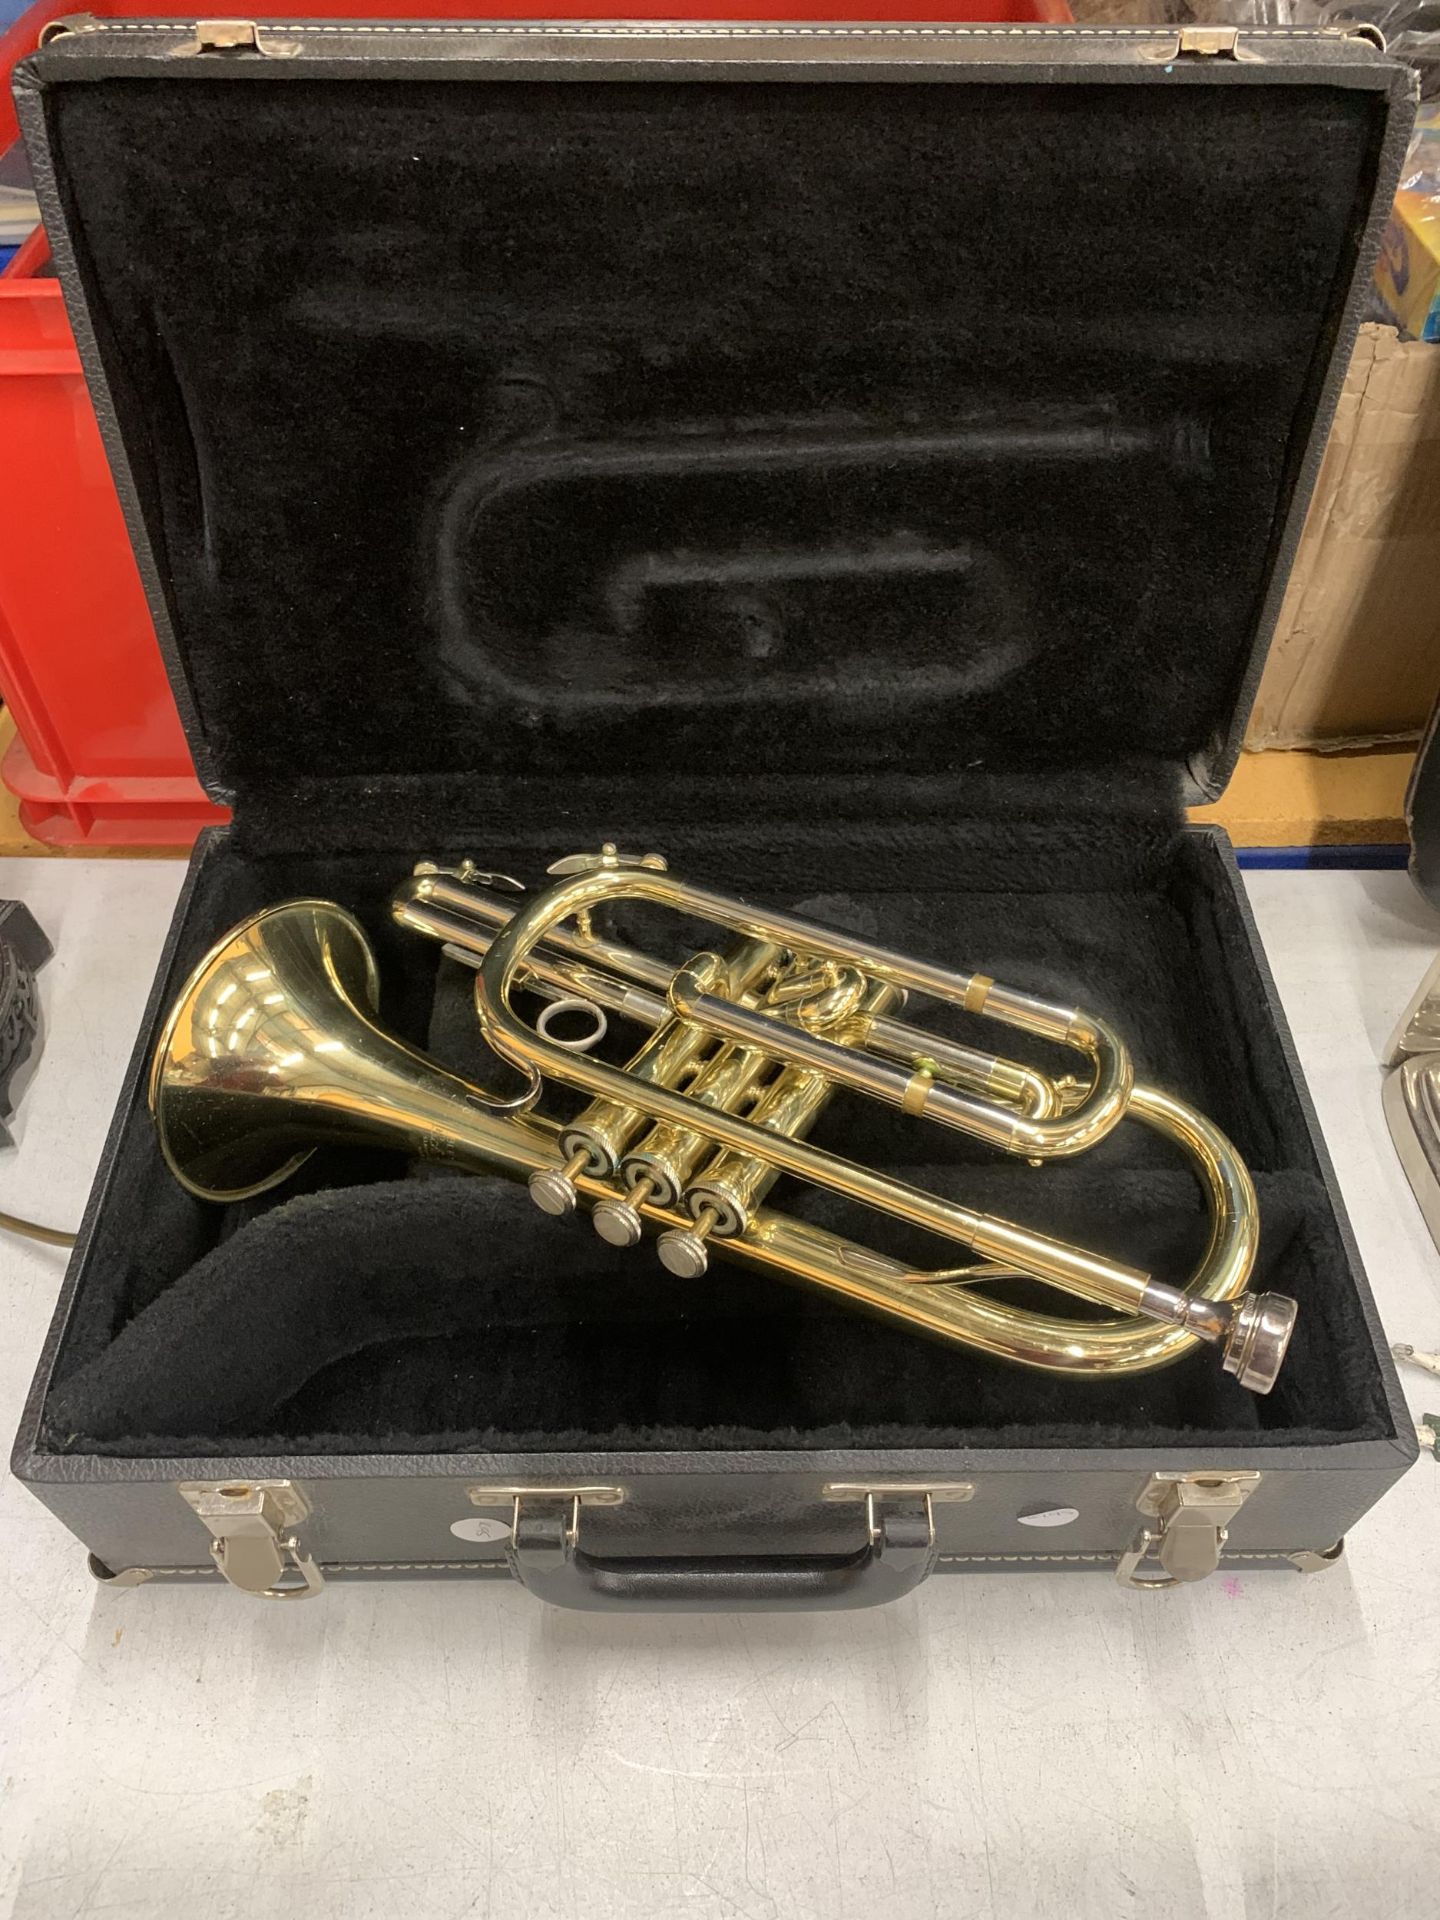 A CASED BLESSING, U.S.A SCHOLASTIC TRUMPET